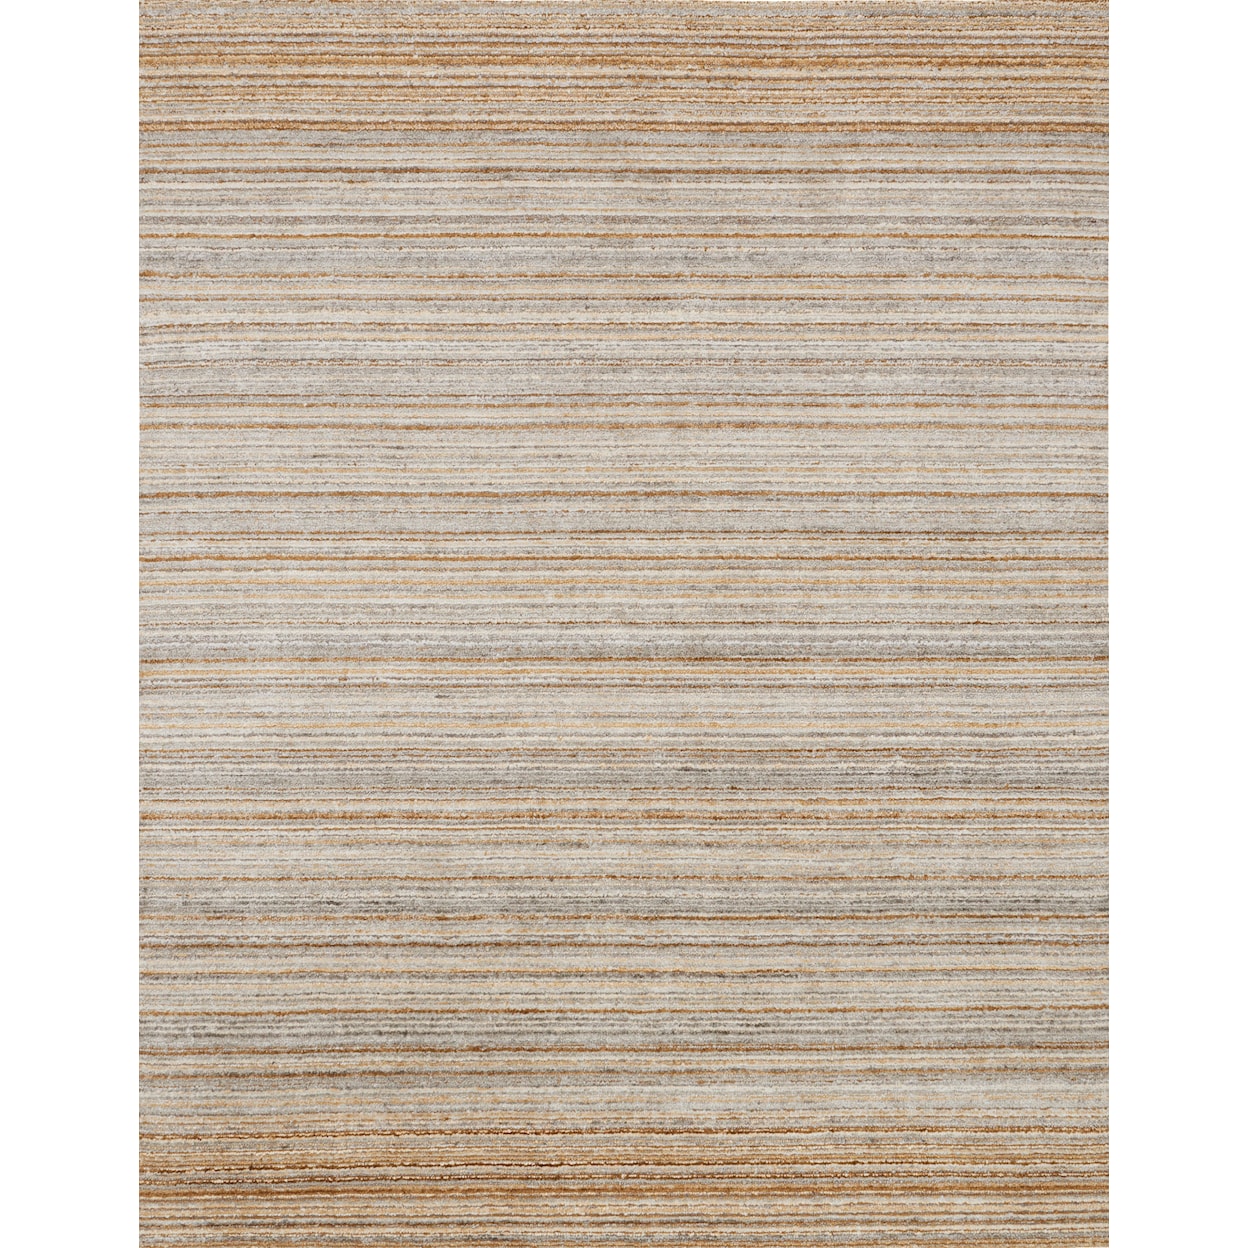 Loloi Rugs Haven 9'-6" x 13'-6" Area Rug